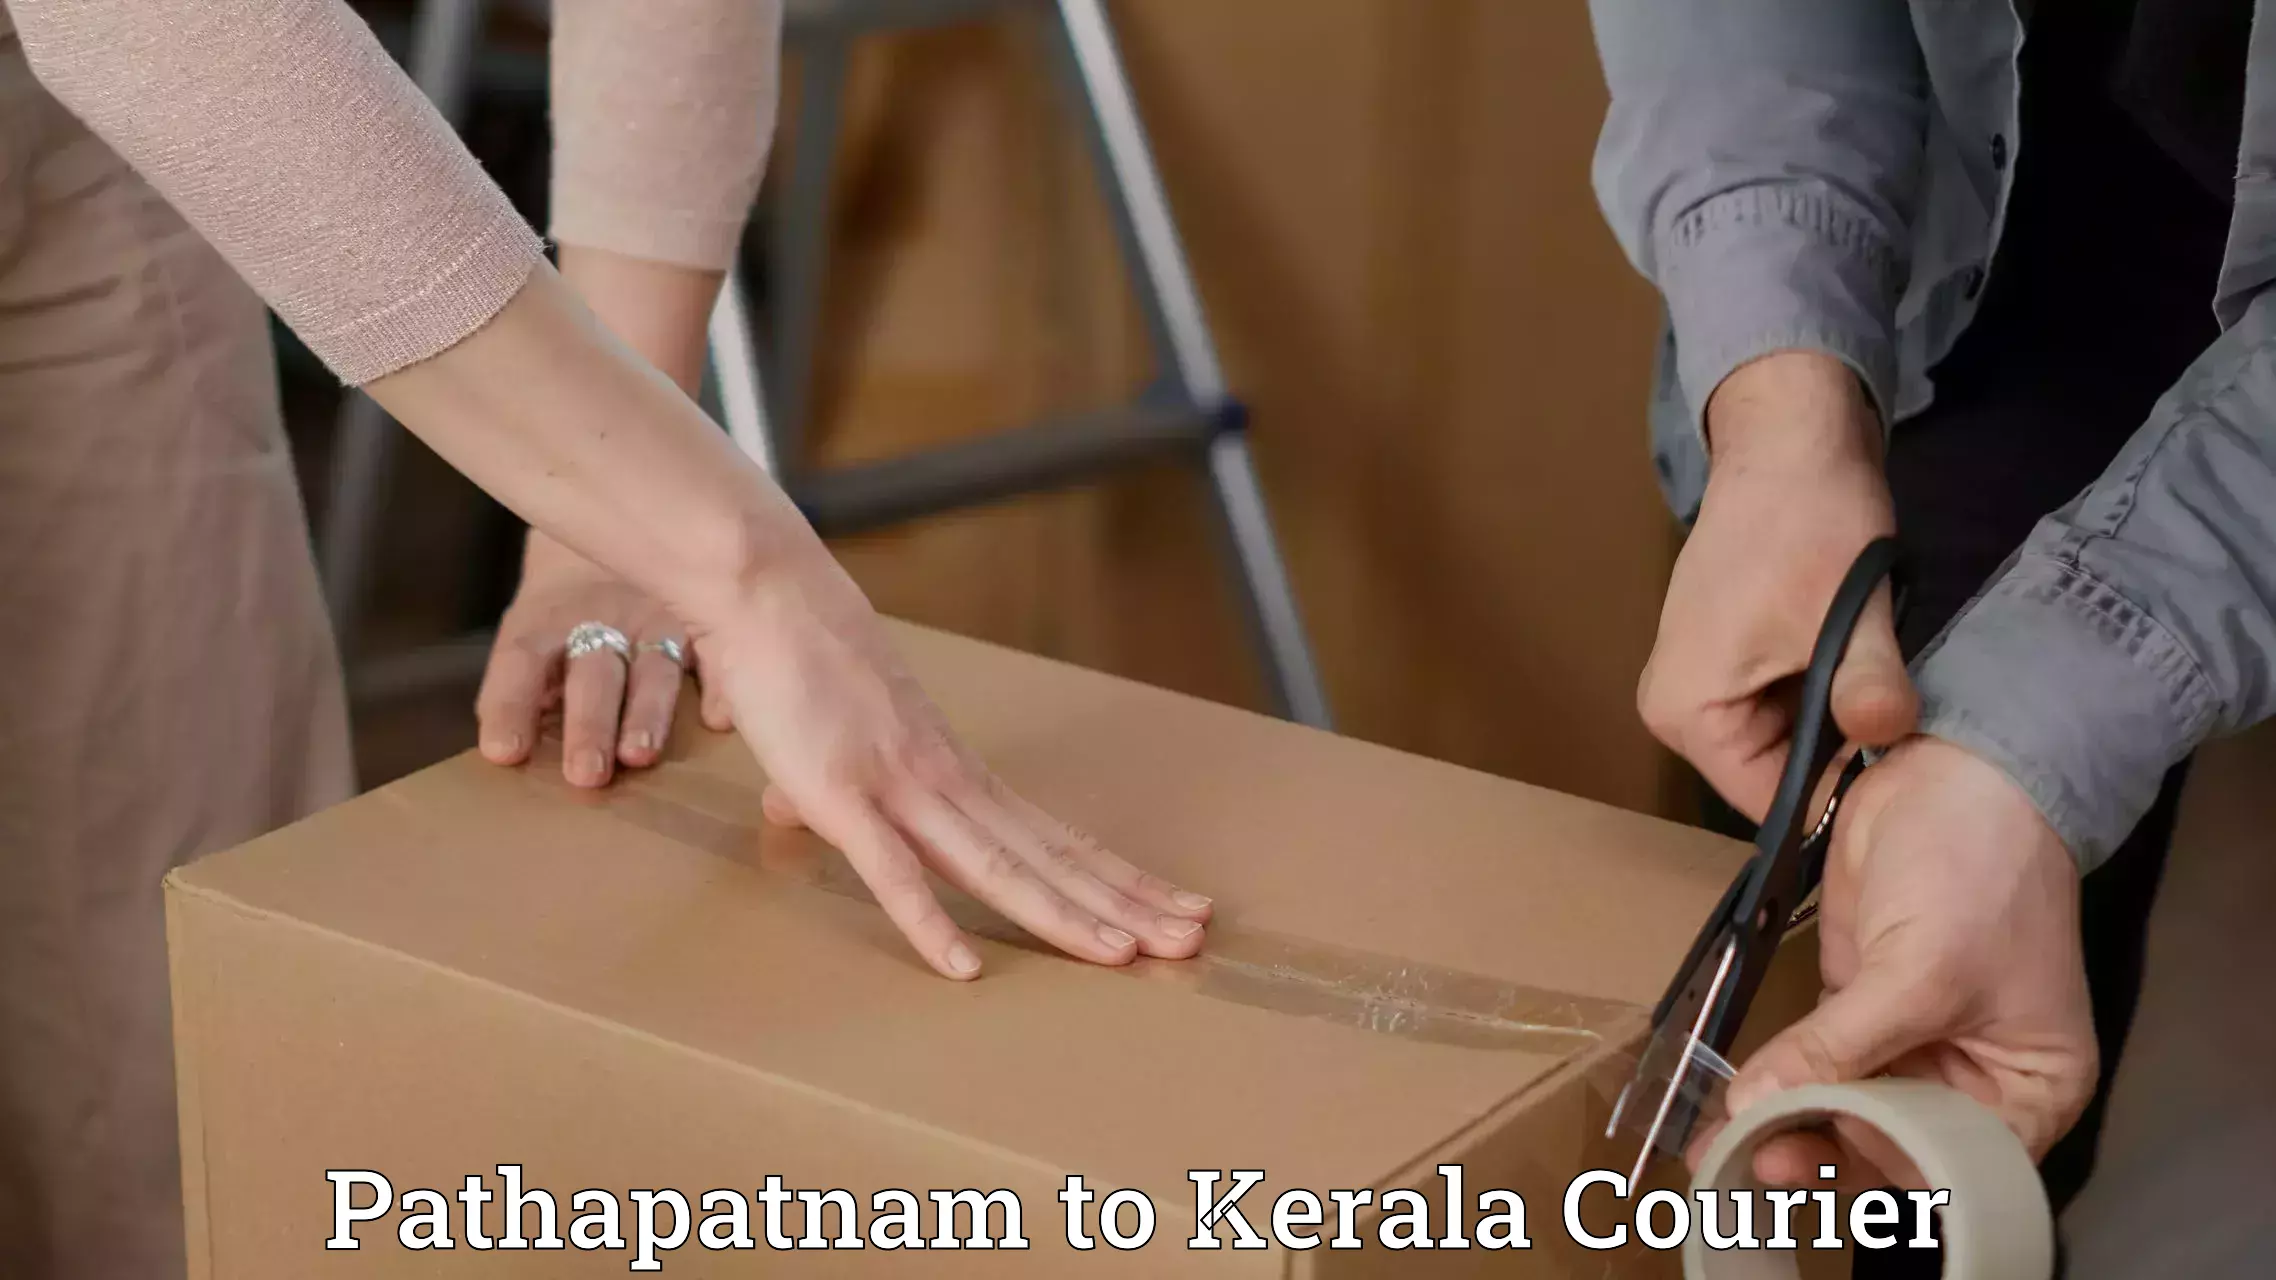 Efficient order fulfillment Pathapatnam to Ottapalam